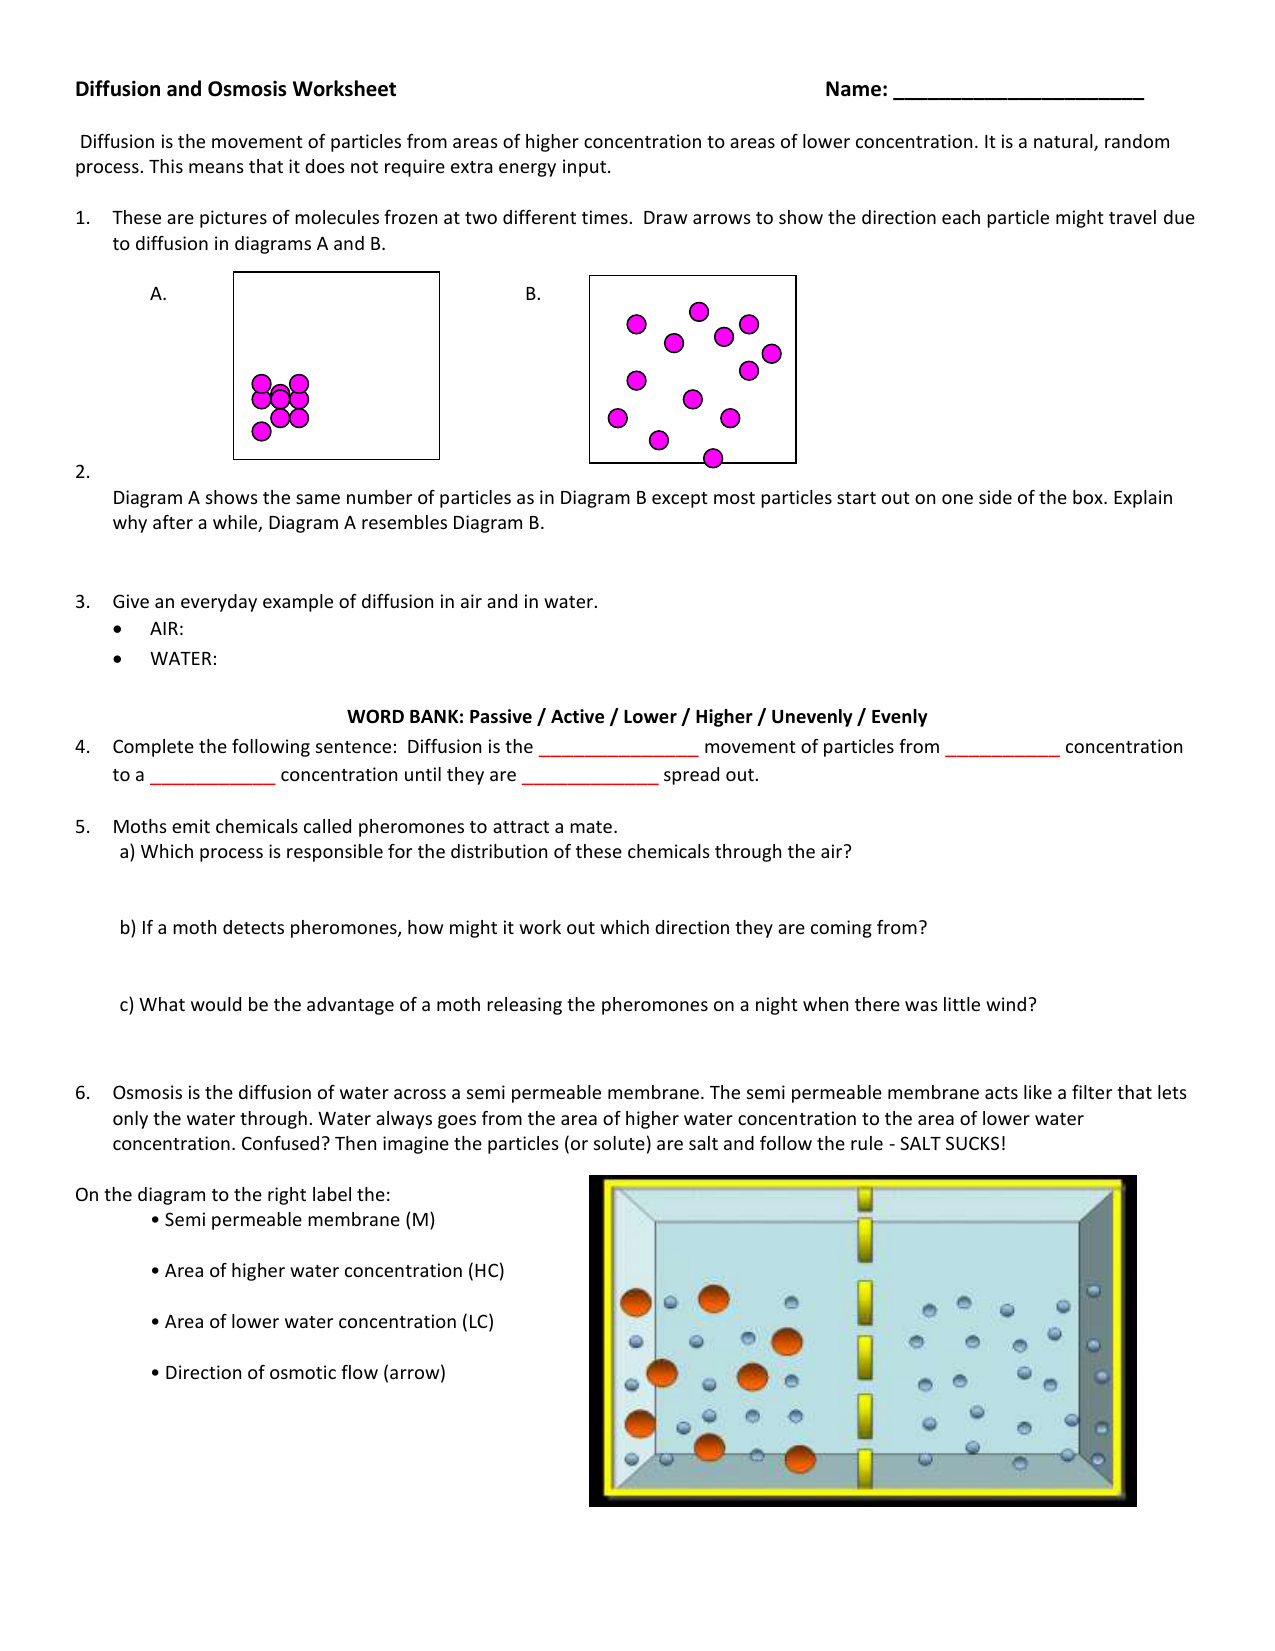 Diffusion and Osmosis Worksheet Within Diffusion And Osmosis Worksheet